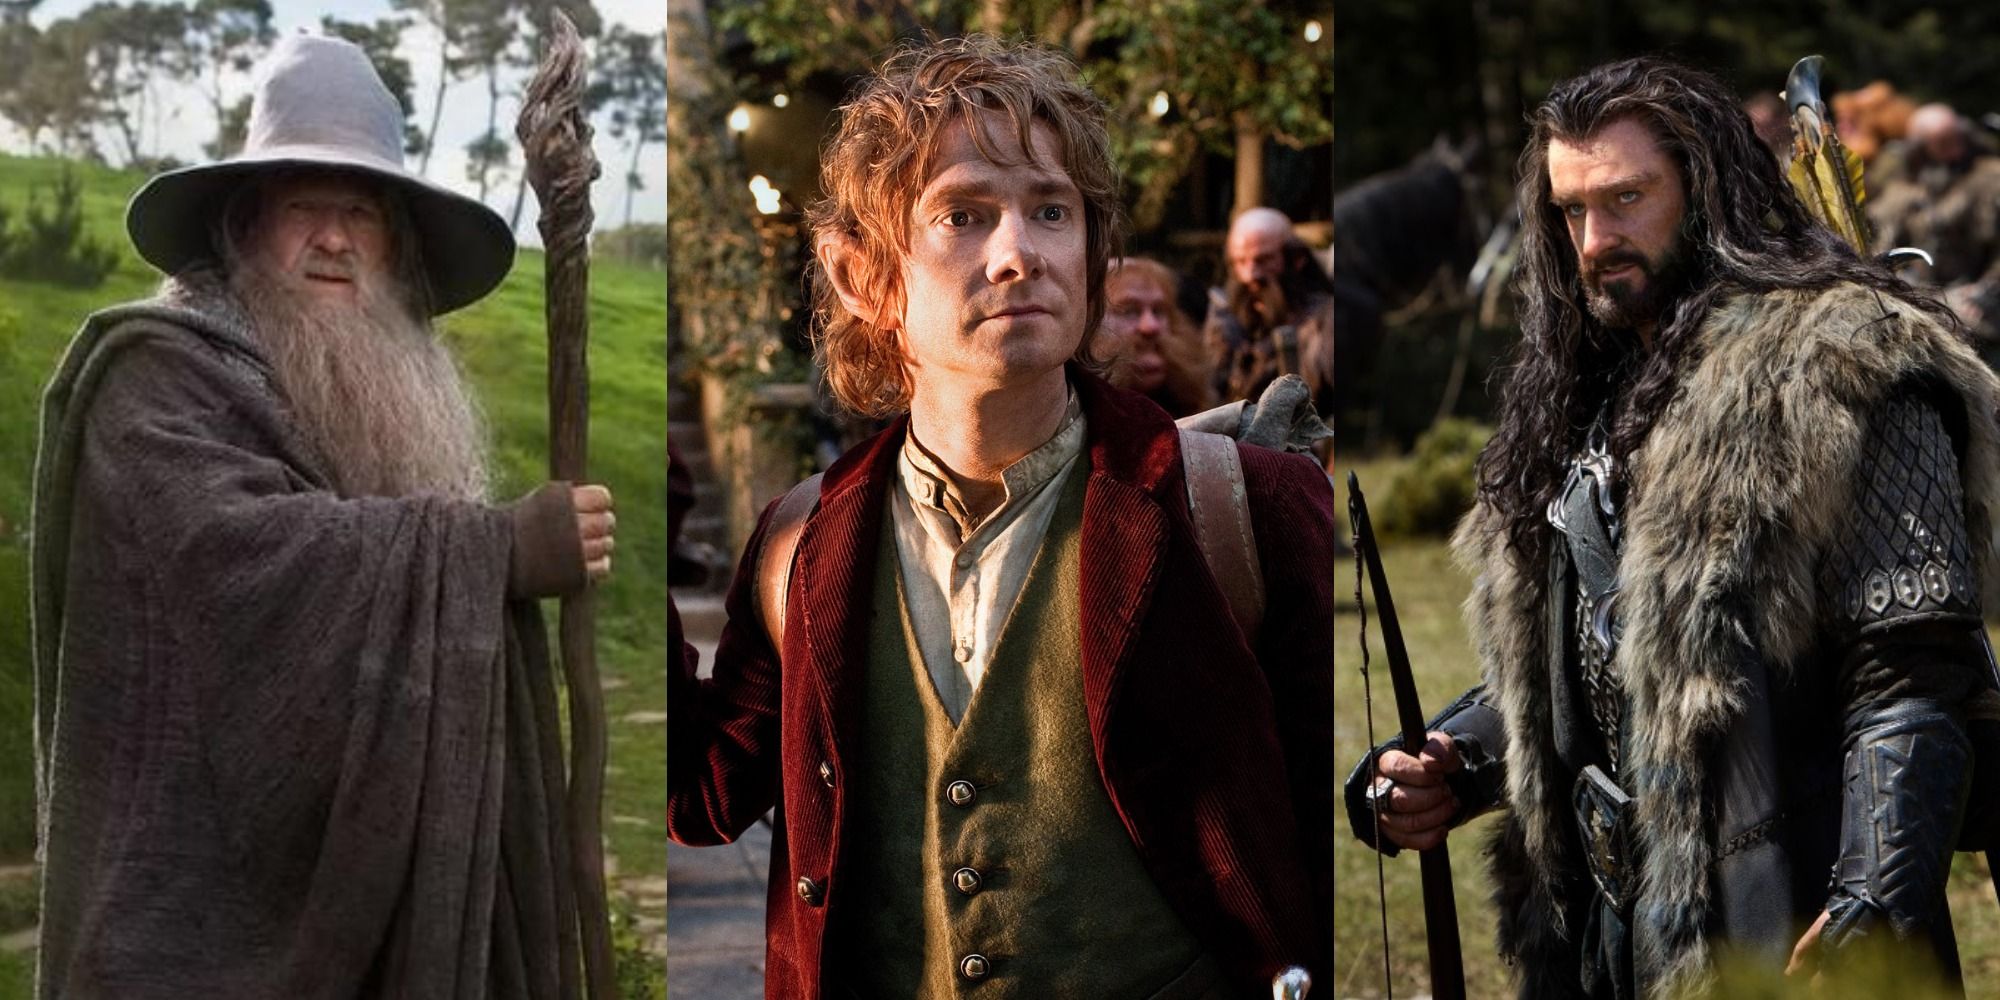 Split image of Gandalf, Bilbo, and Thorin from The Hobbit: An Unexpected Journey